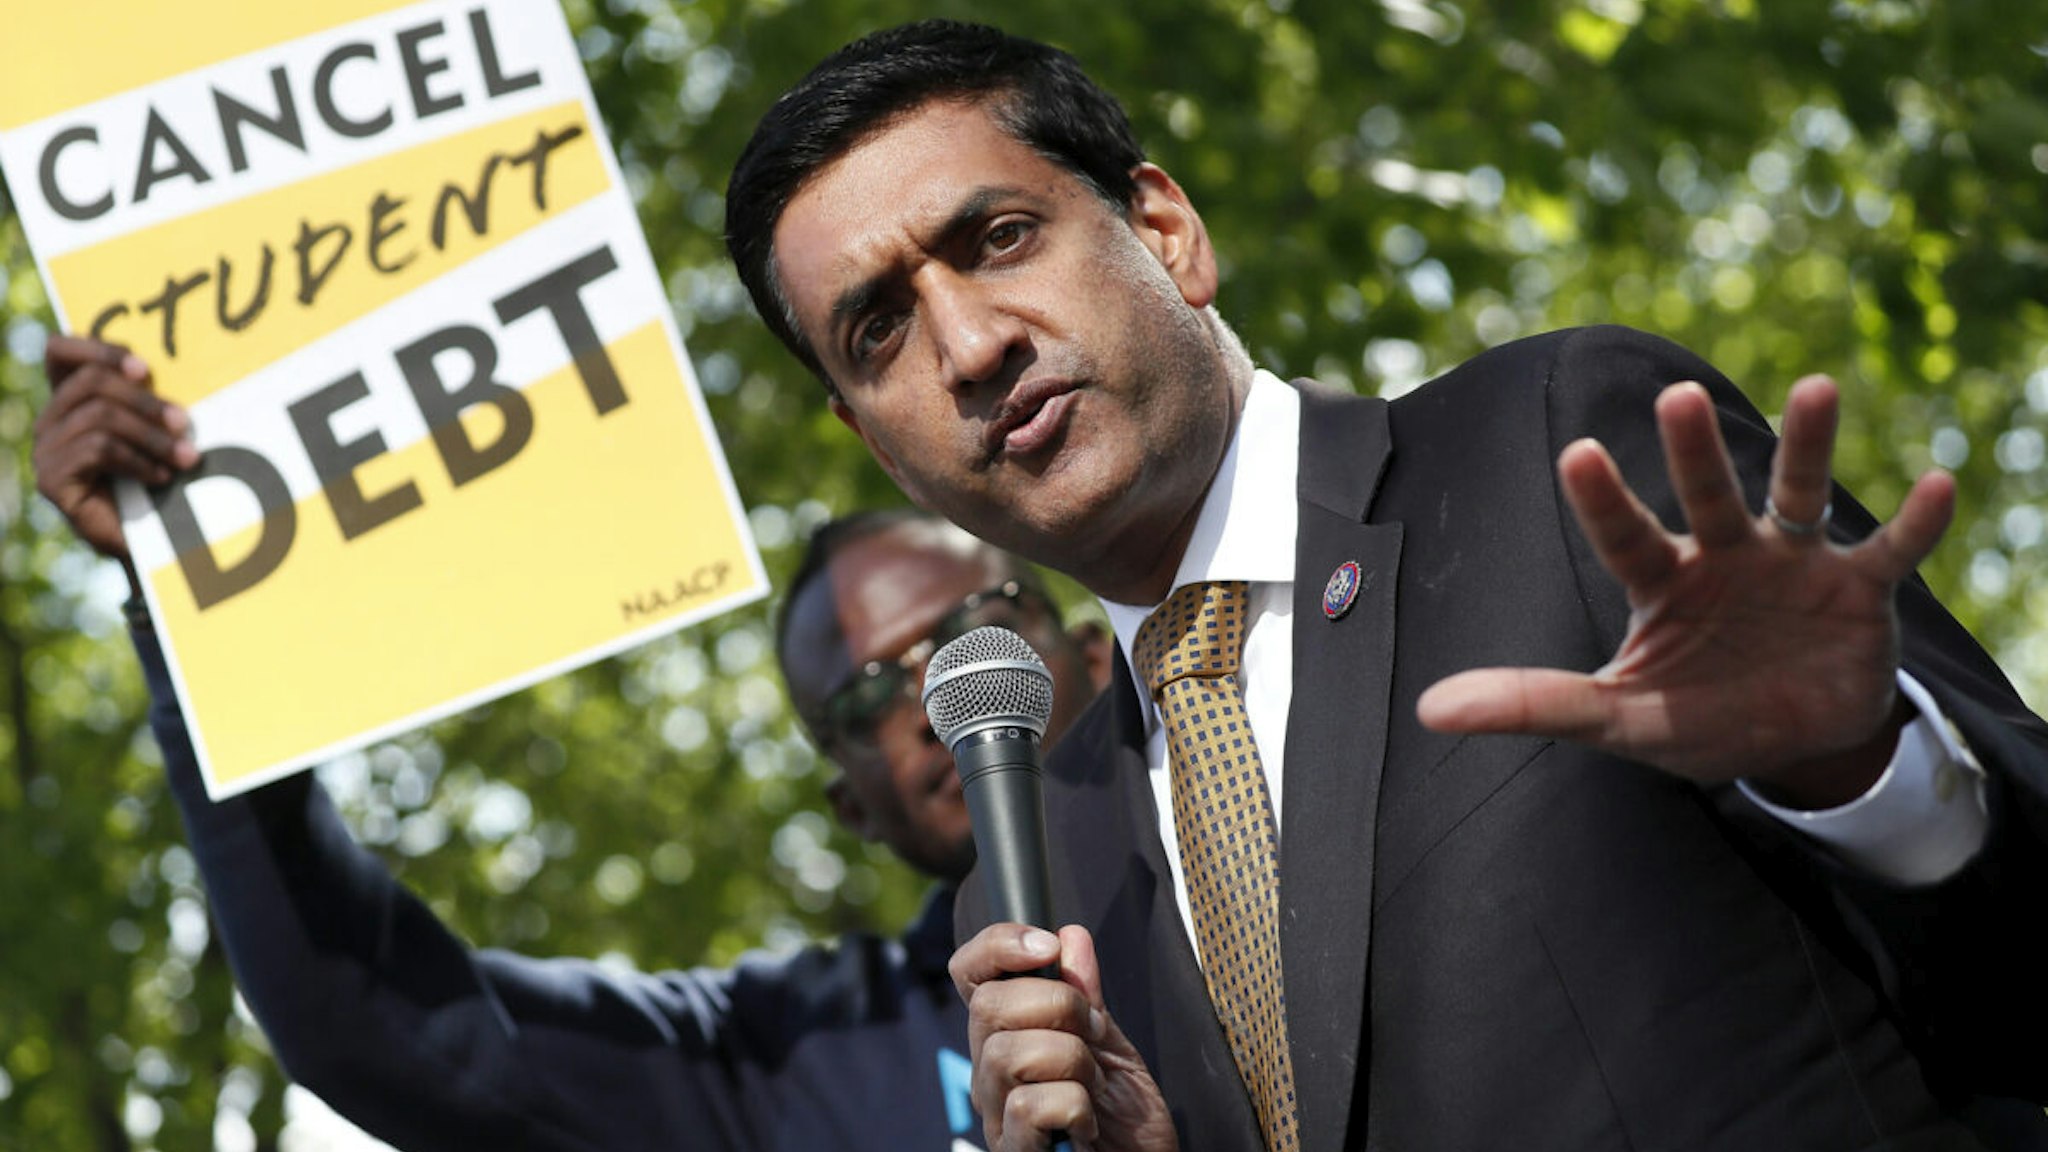 Rep. Ro Khanna (D-CA) joins student debtors to once again call on President Biden to cancel student debt at an early morning action outside the White House on April 27, 2022 in Washington, DC.